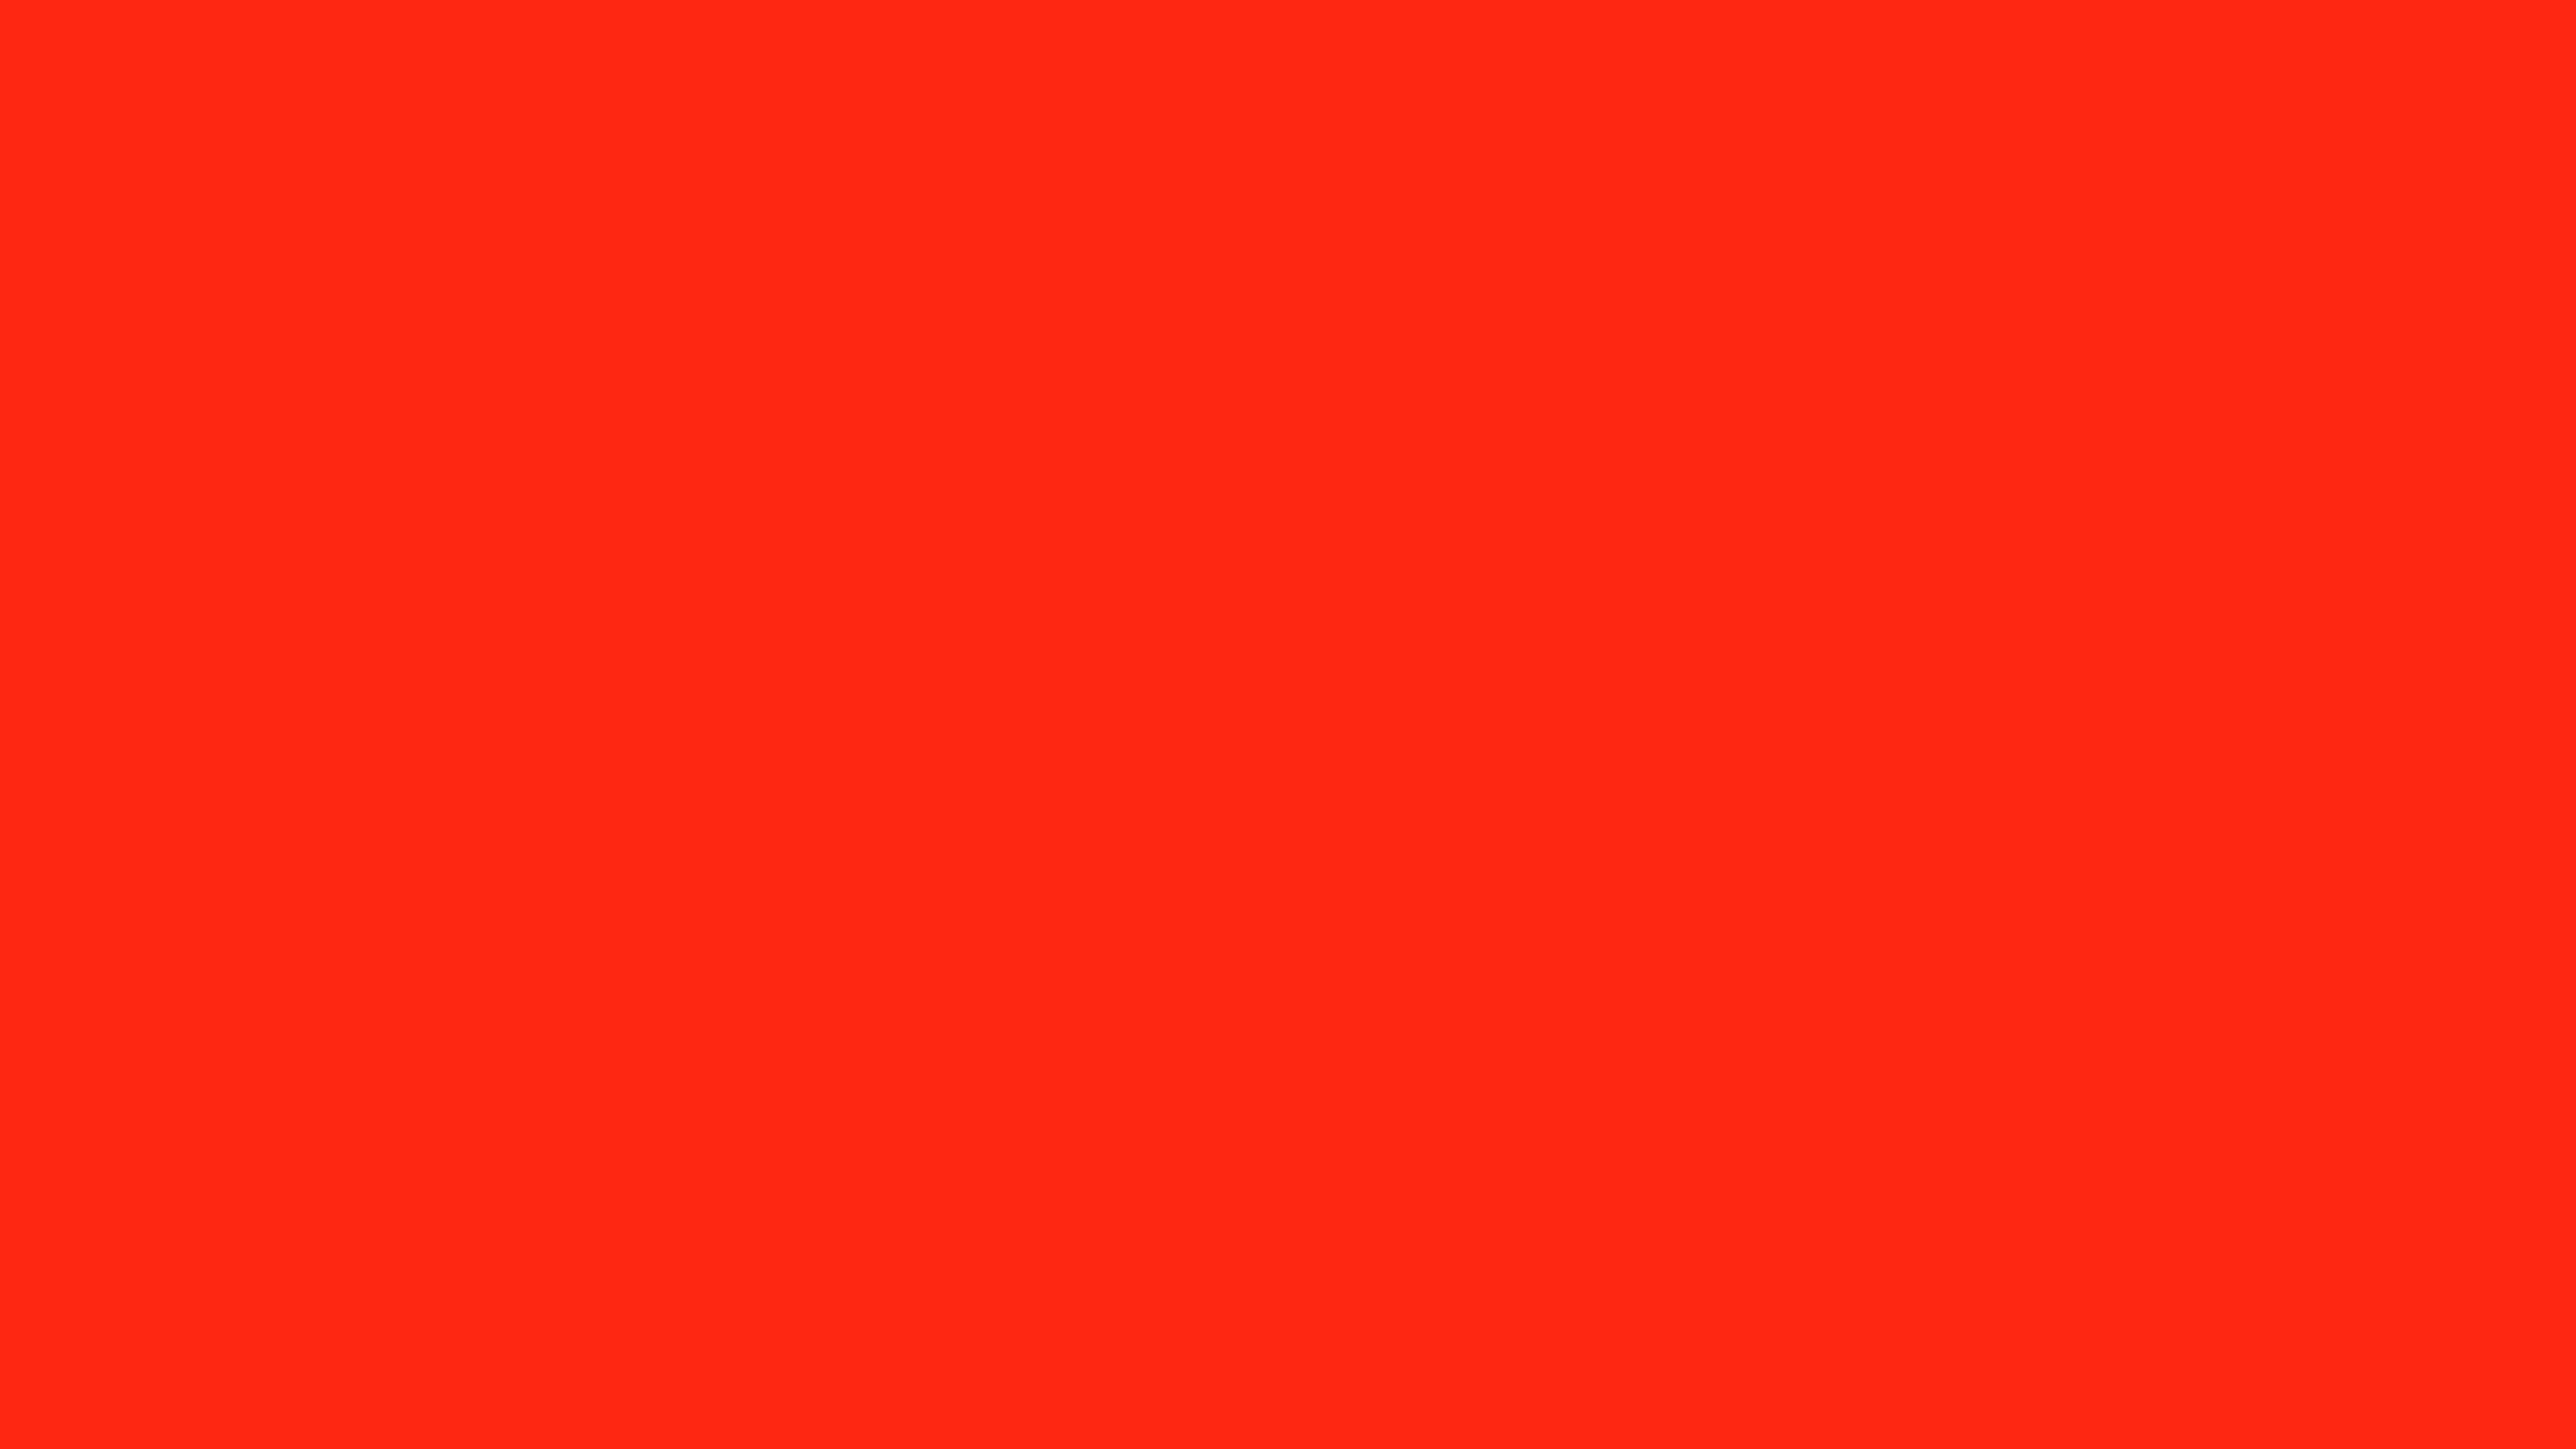 5120x2880 Red RYB Solid Color Background